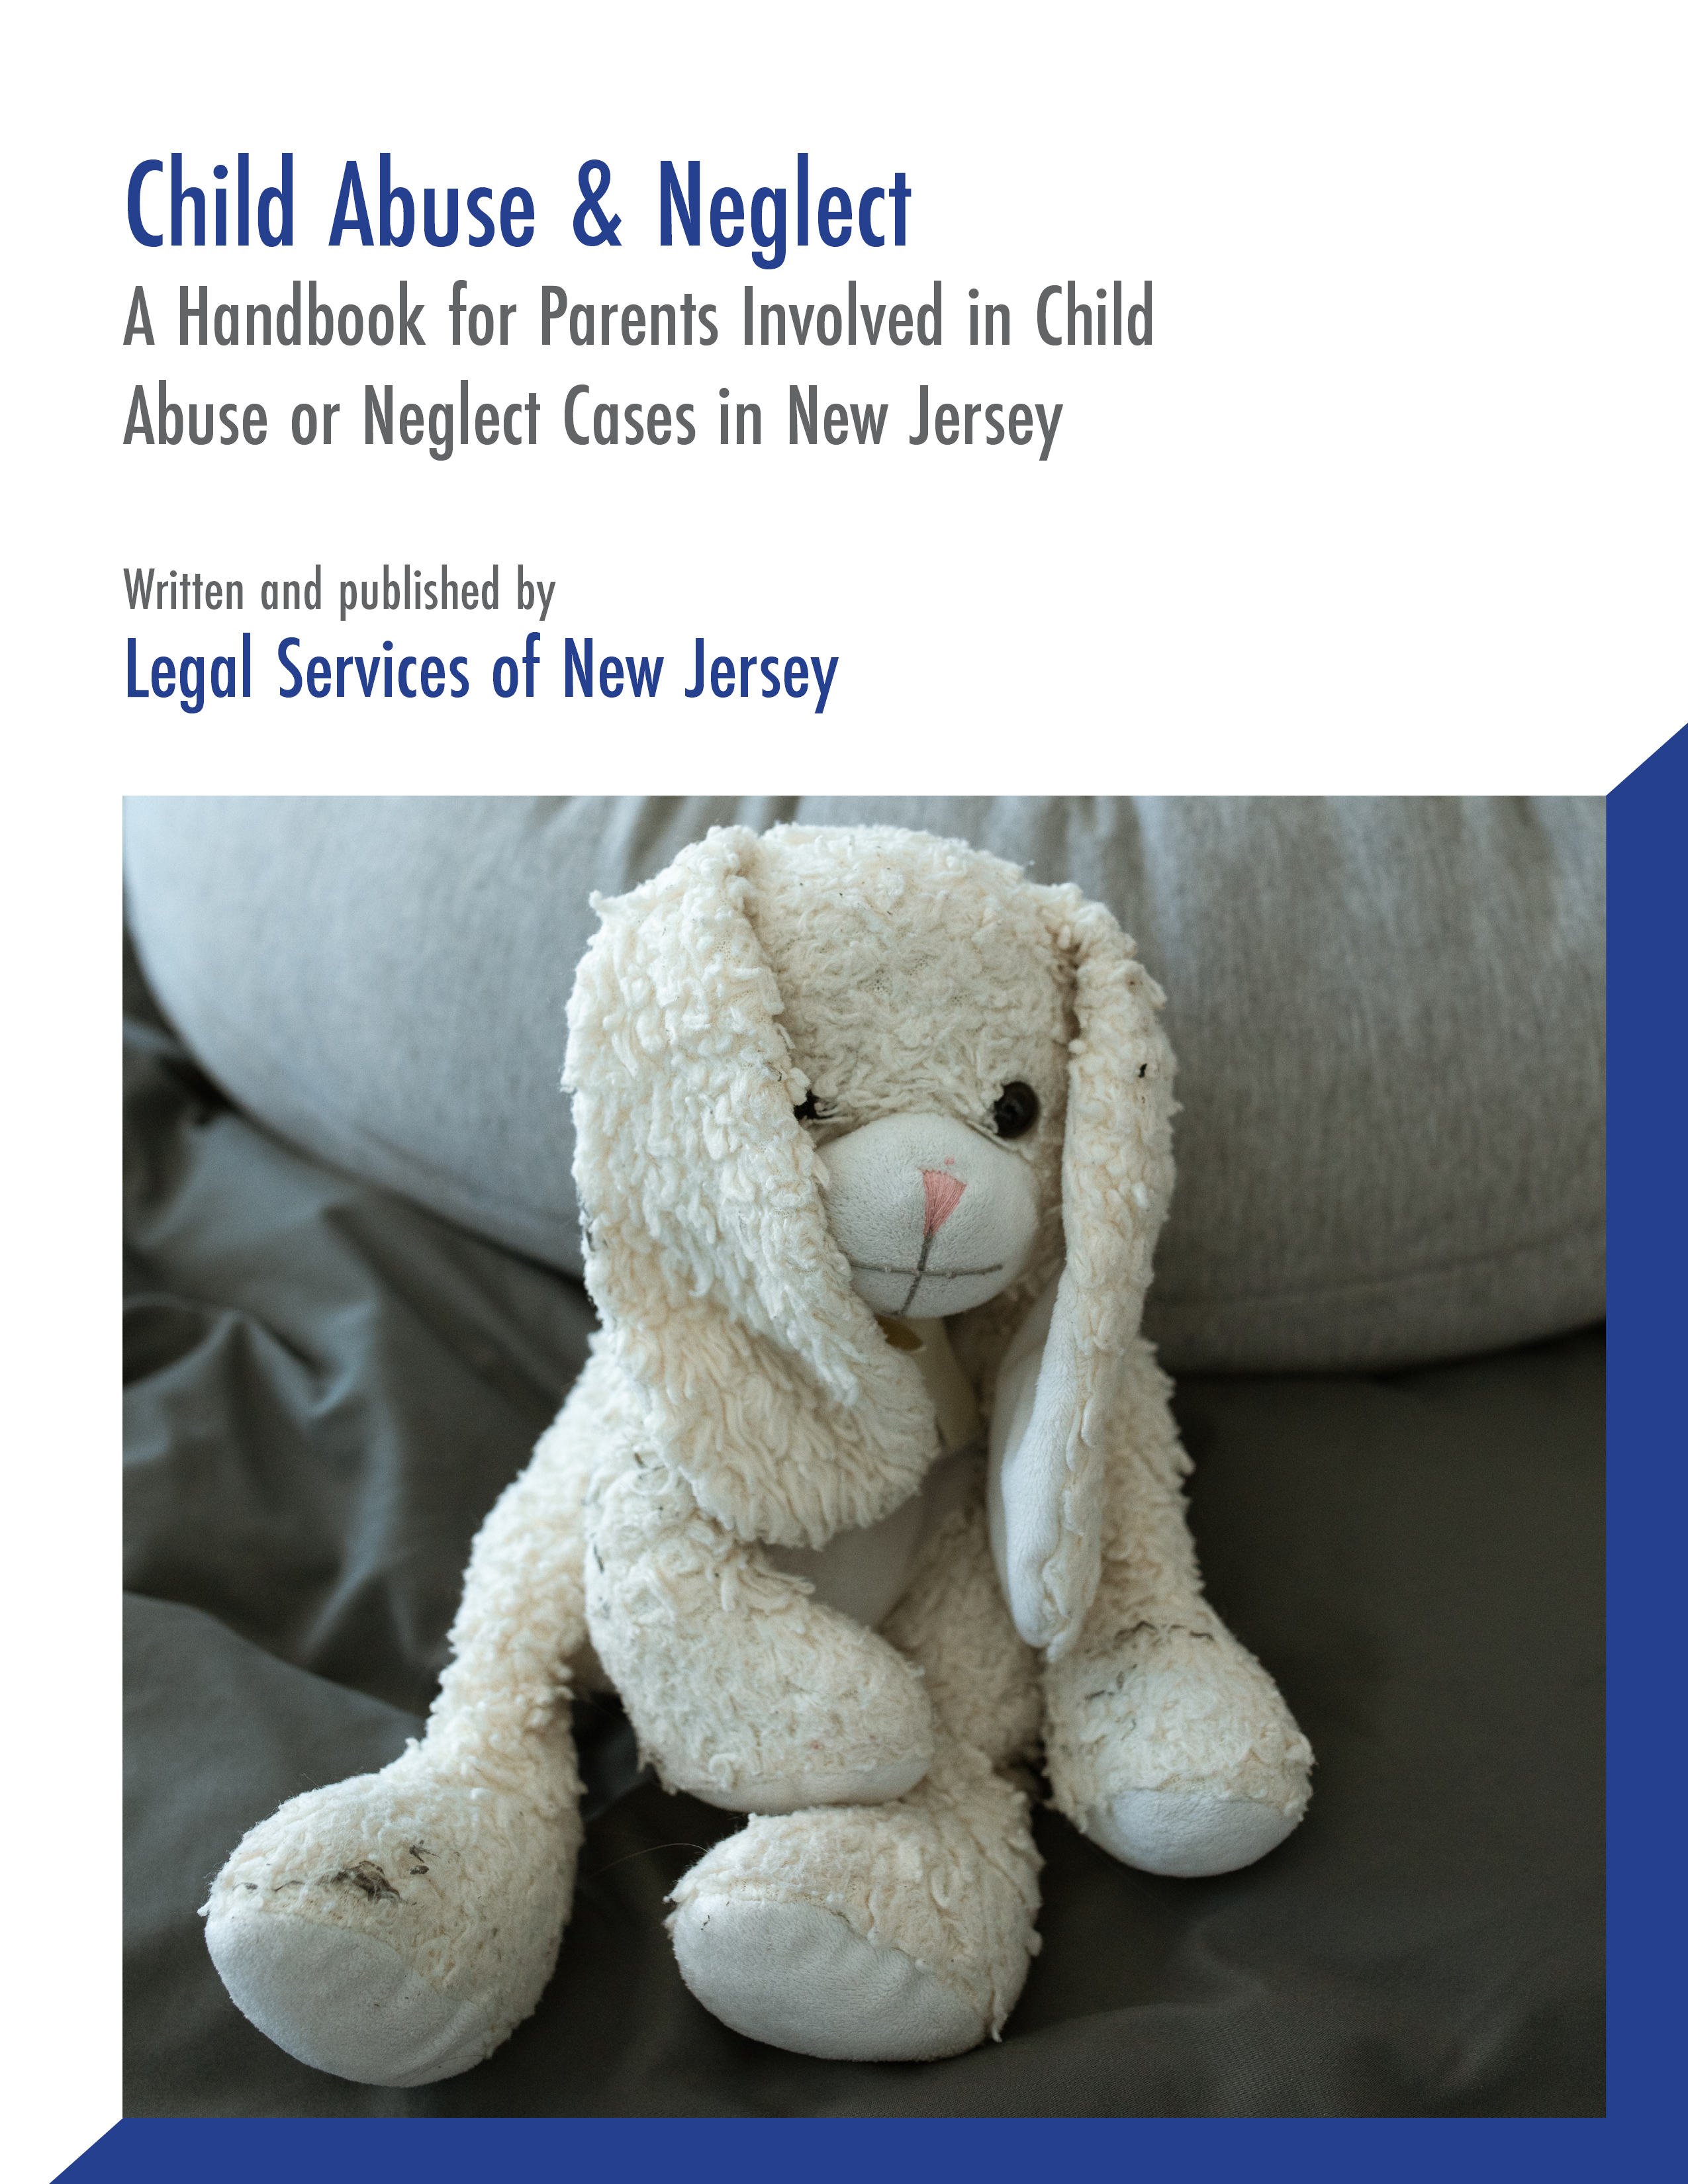 Child Abuse and Neglect: A guide for parents involved in child abuse or neglect cases in New Jersey